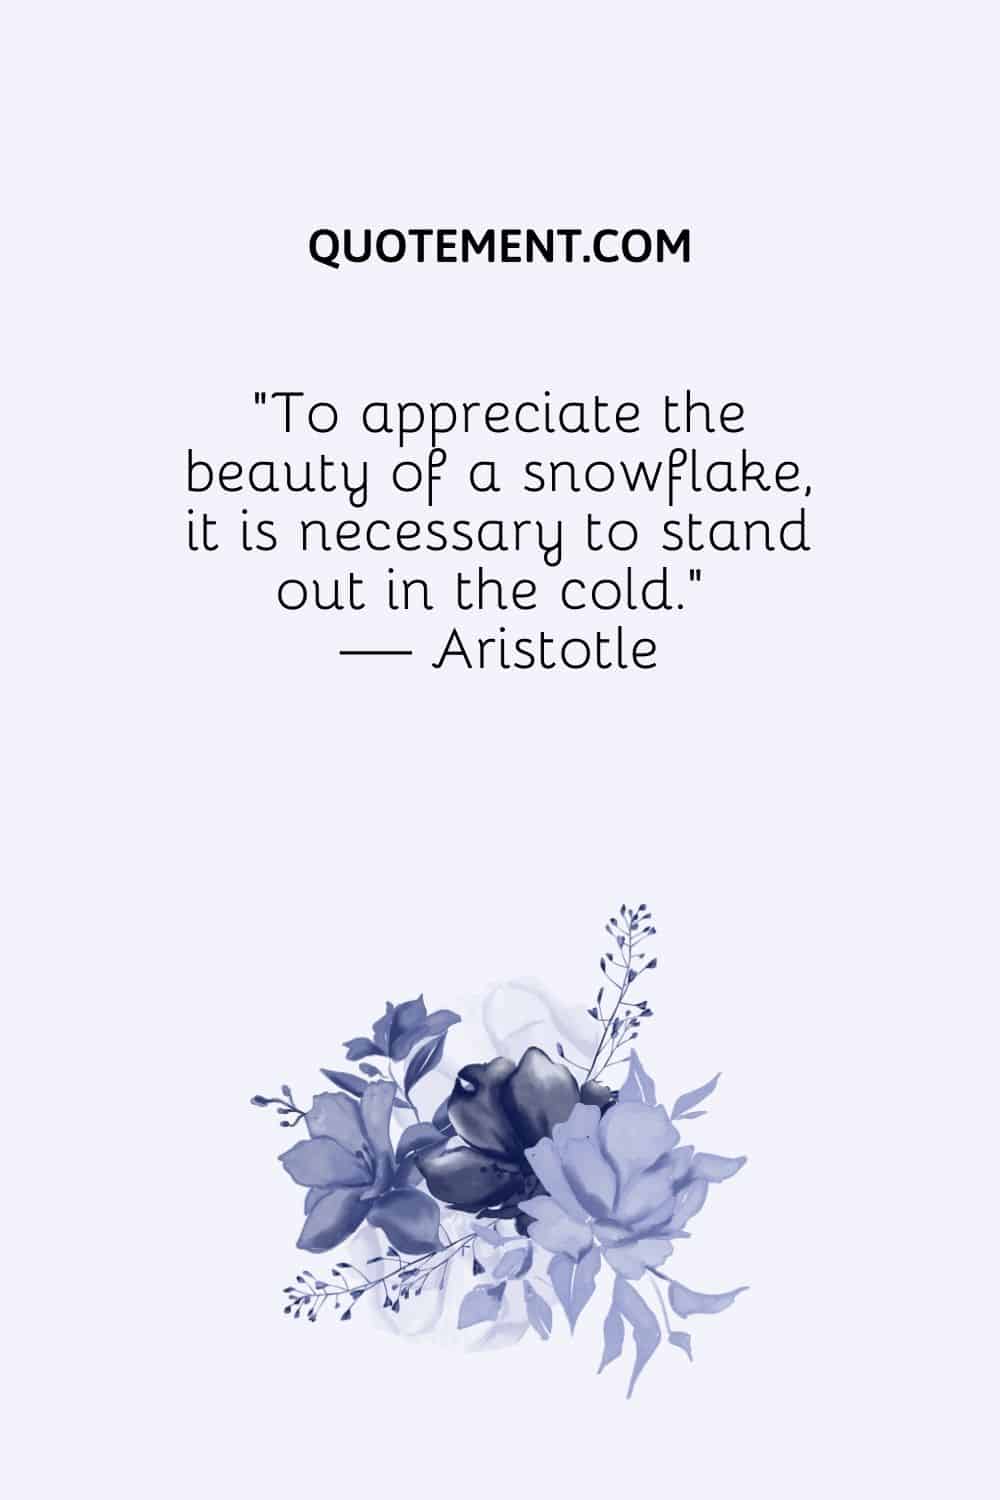 To appreciate the beauty of a snowflake, it is necessary to stand out in the cold